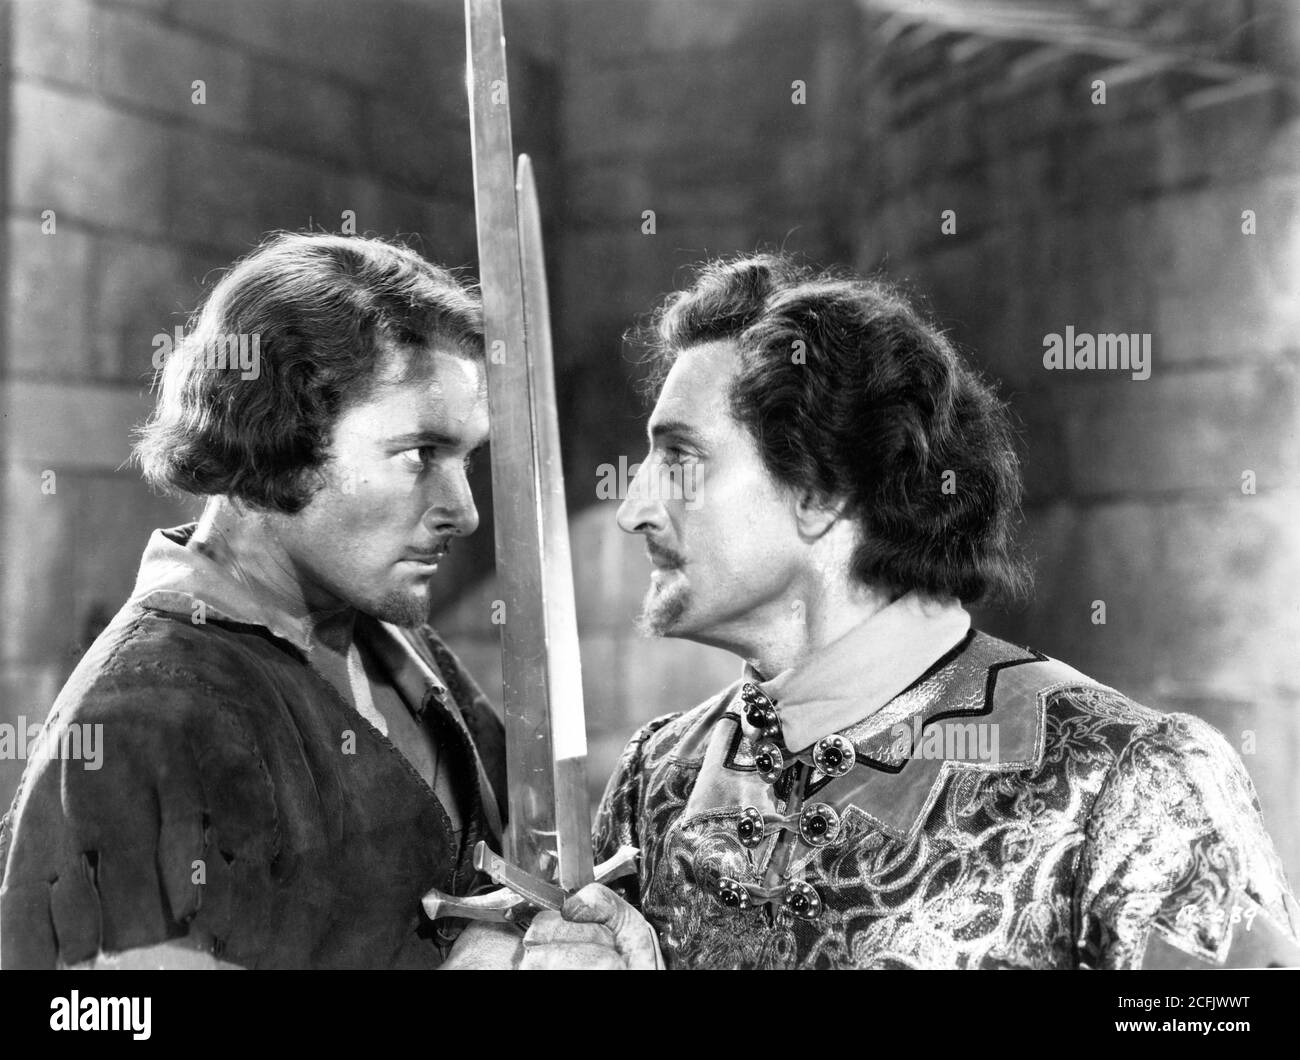 ERROL FLYNN and BASIL RATHBONE in climactic duel in THE ADVENTURES OF ROBIN HOOD 1938 directors MICHAEL CURTIZ and WILLIAM KEIGHLEY music Erich Wolfgang Korngold Warner Bros. Stock Photo